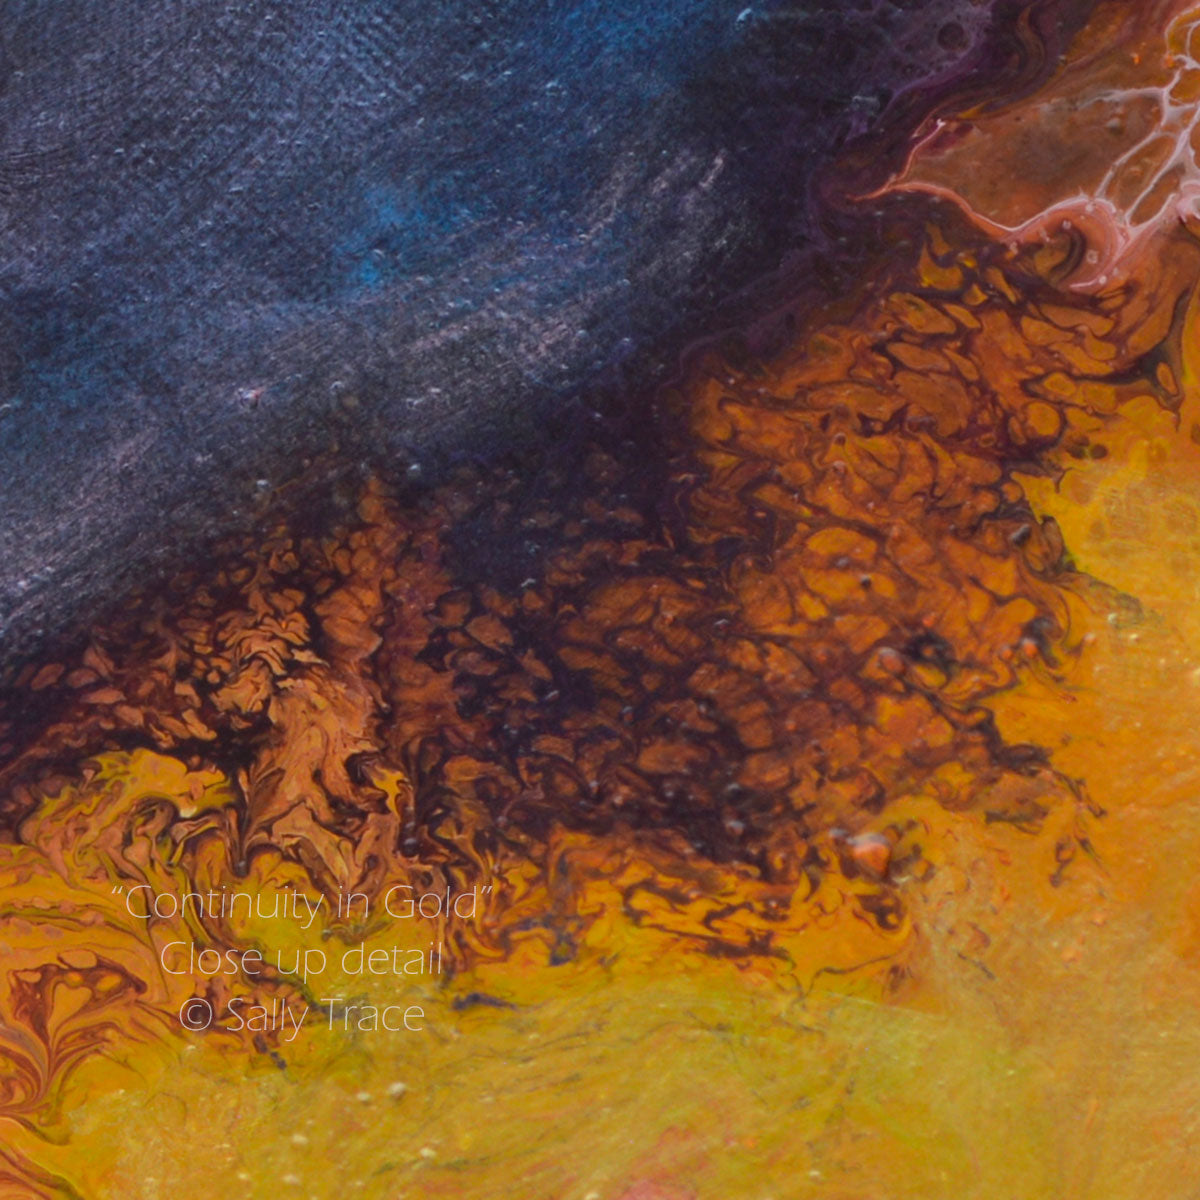 "Continuity in Gold" a fluid art piece with lots of movement, bright and muted tones.  These are giclee prints by Sally Trace.  Art decor for the living room, dining room, office.  Large contemporary fine art for sale, close-up view.